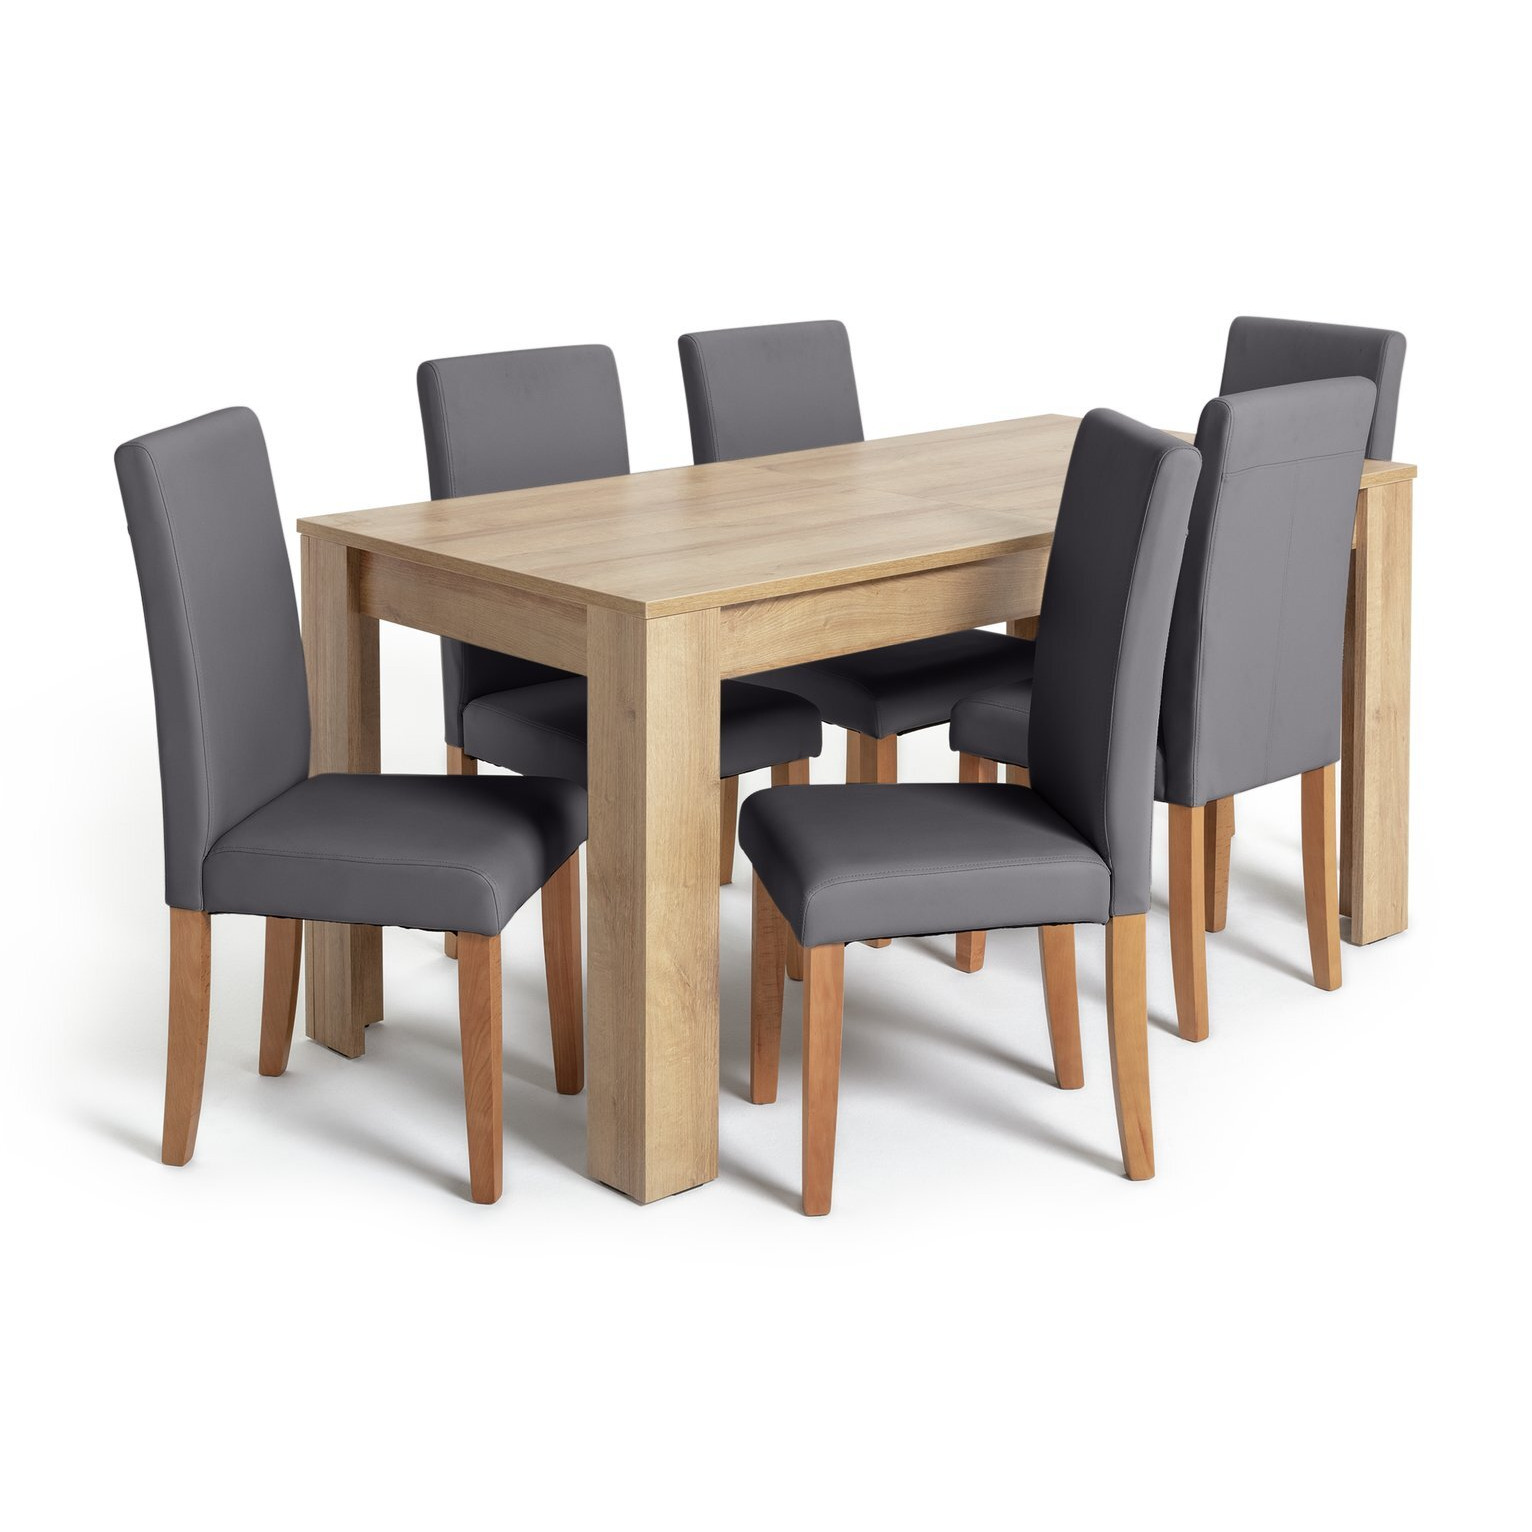 Argos Home Miami XL Extending Table & 6 Charcoal Chairs - image 1